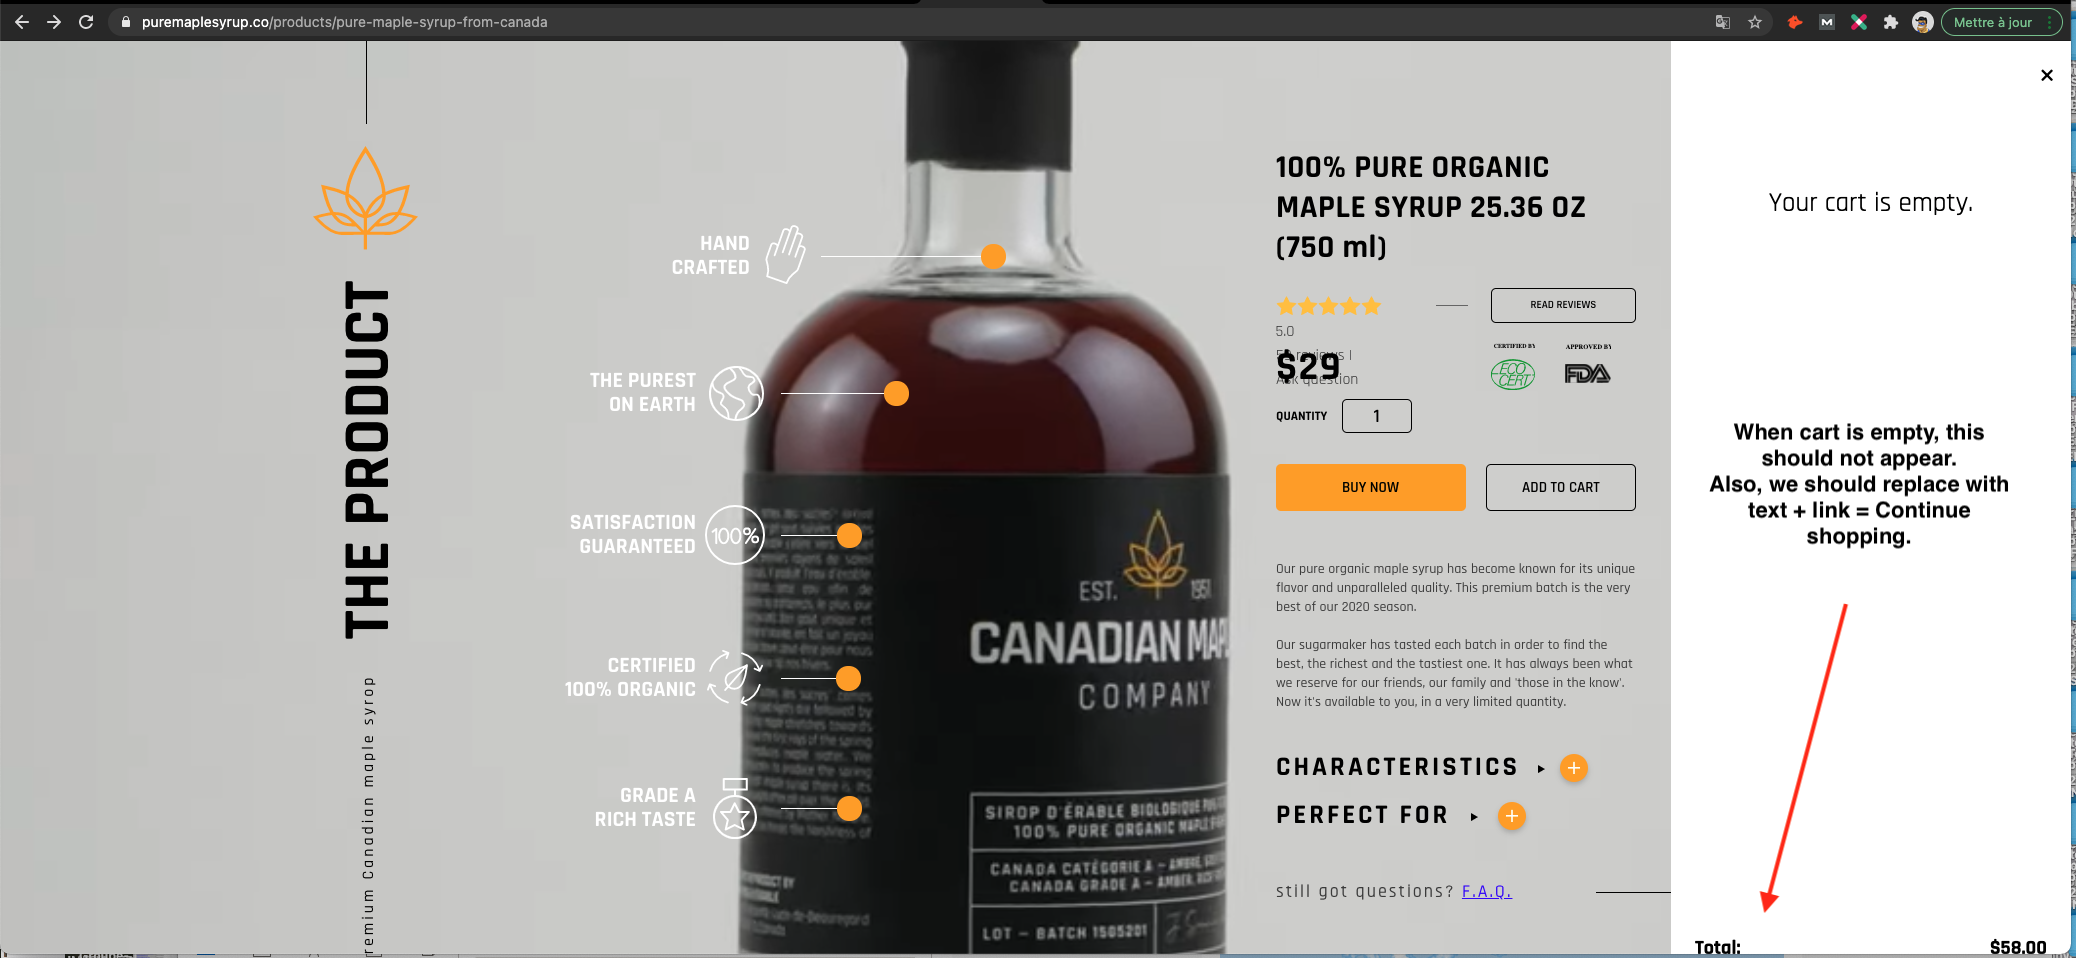 Creating Canadian Maple Company Amidst the COVID-19 Pandemic